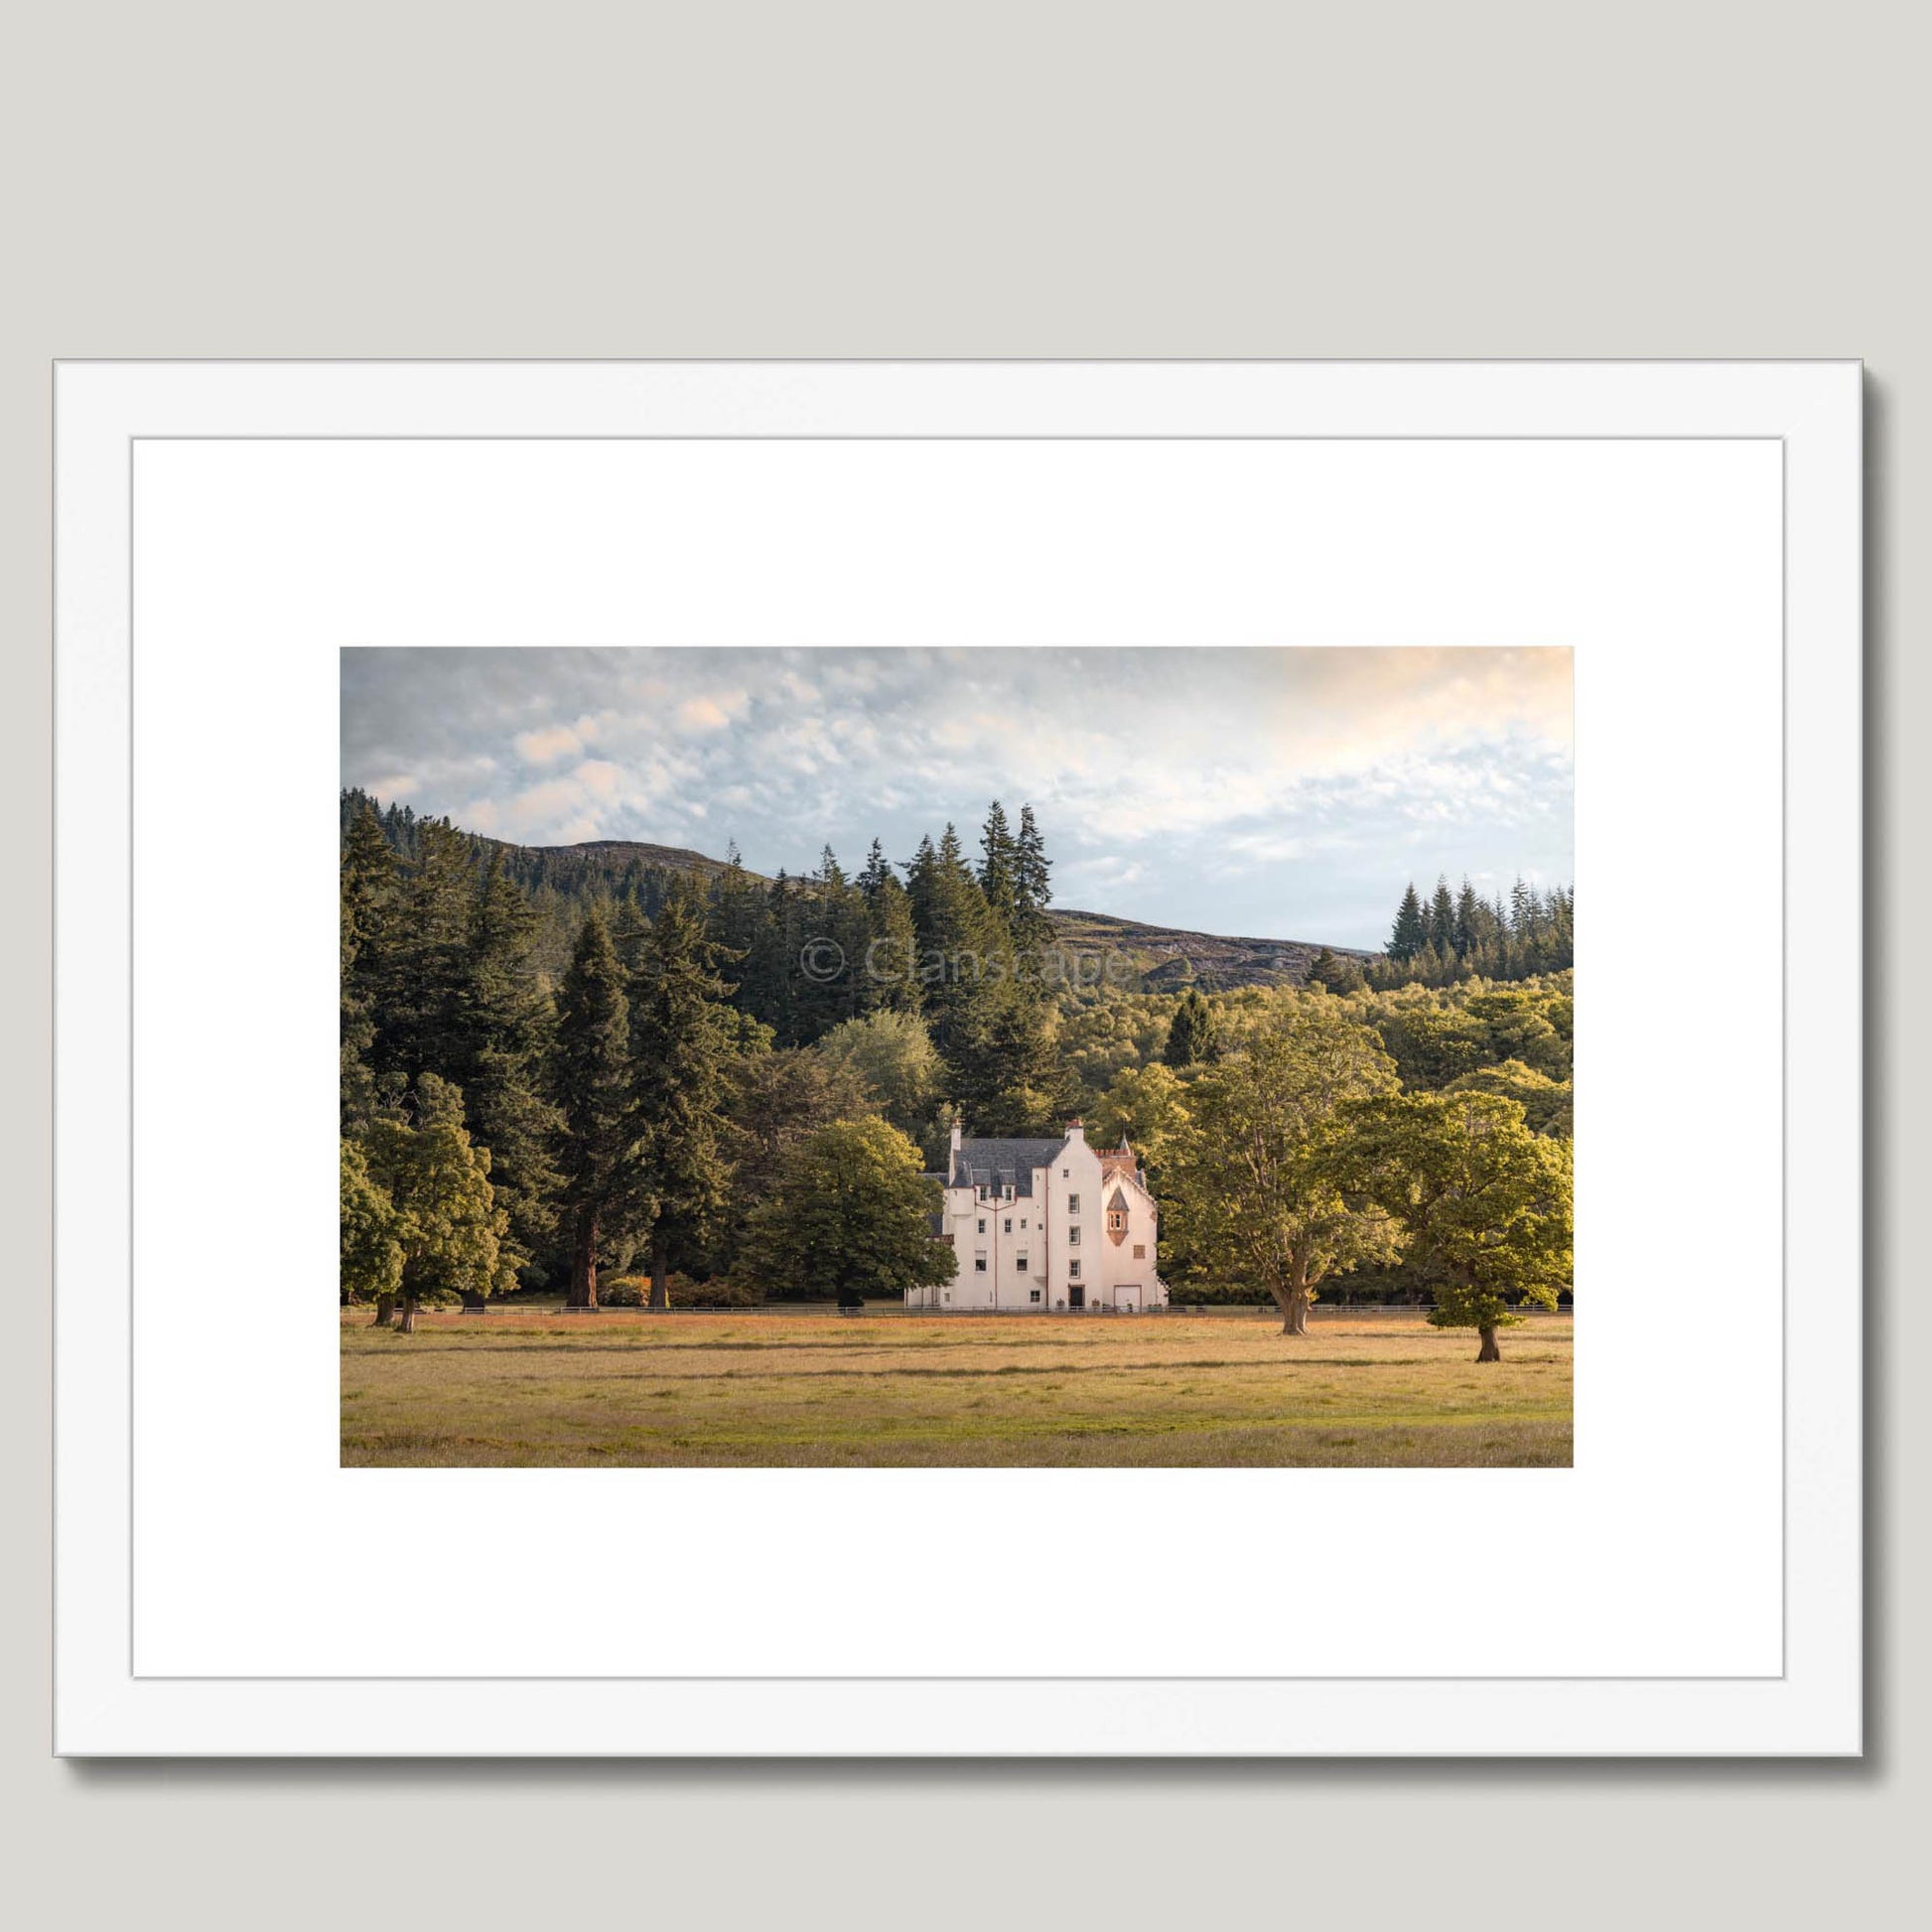 Clan Chisholm - Erchless Castle - Framed & Mounted Photo Print 16"x12" White